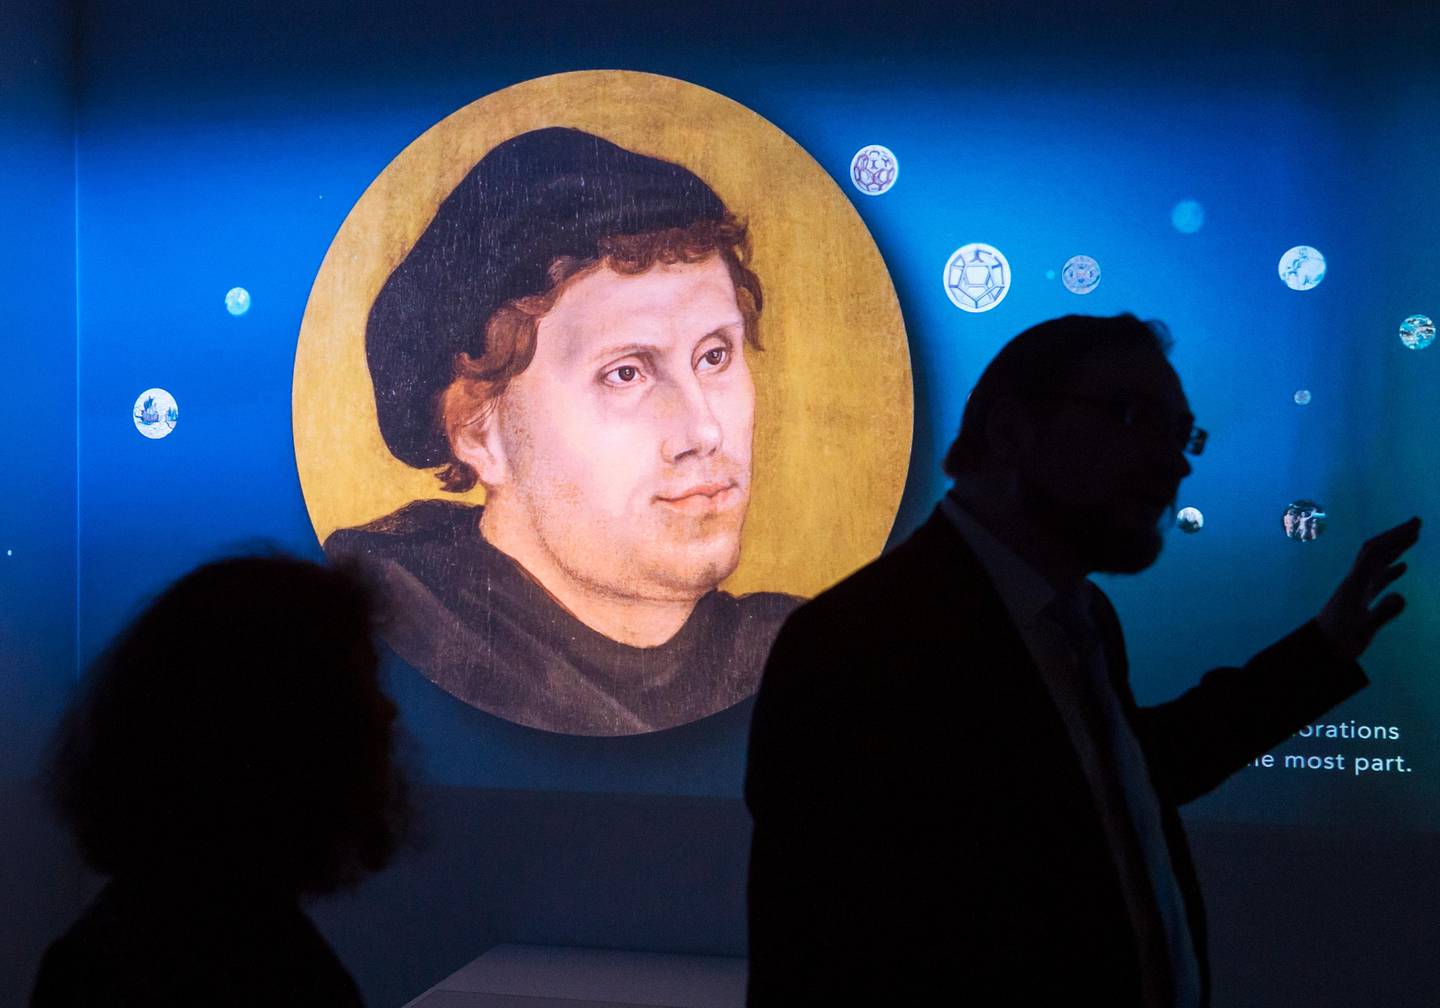 Visitors stand in front of a video installation displaying a portrait of Martin Luther during the press preview of the exhibition '95 Treasures ?Äì 95 People' in the Augusteum in Wittenberg, Germany, Friday, May 12, 2017. The focus of the exhibition is on Luther's nailing of the theses on the door of the Castle Church. The exhibition starts on May 13, 2017 and lasts until Nov. 5, 2017. (AP Photo/Jens Meyer)